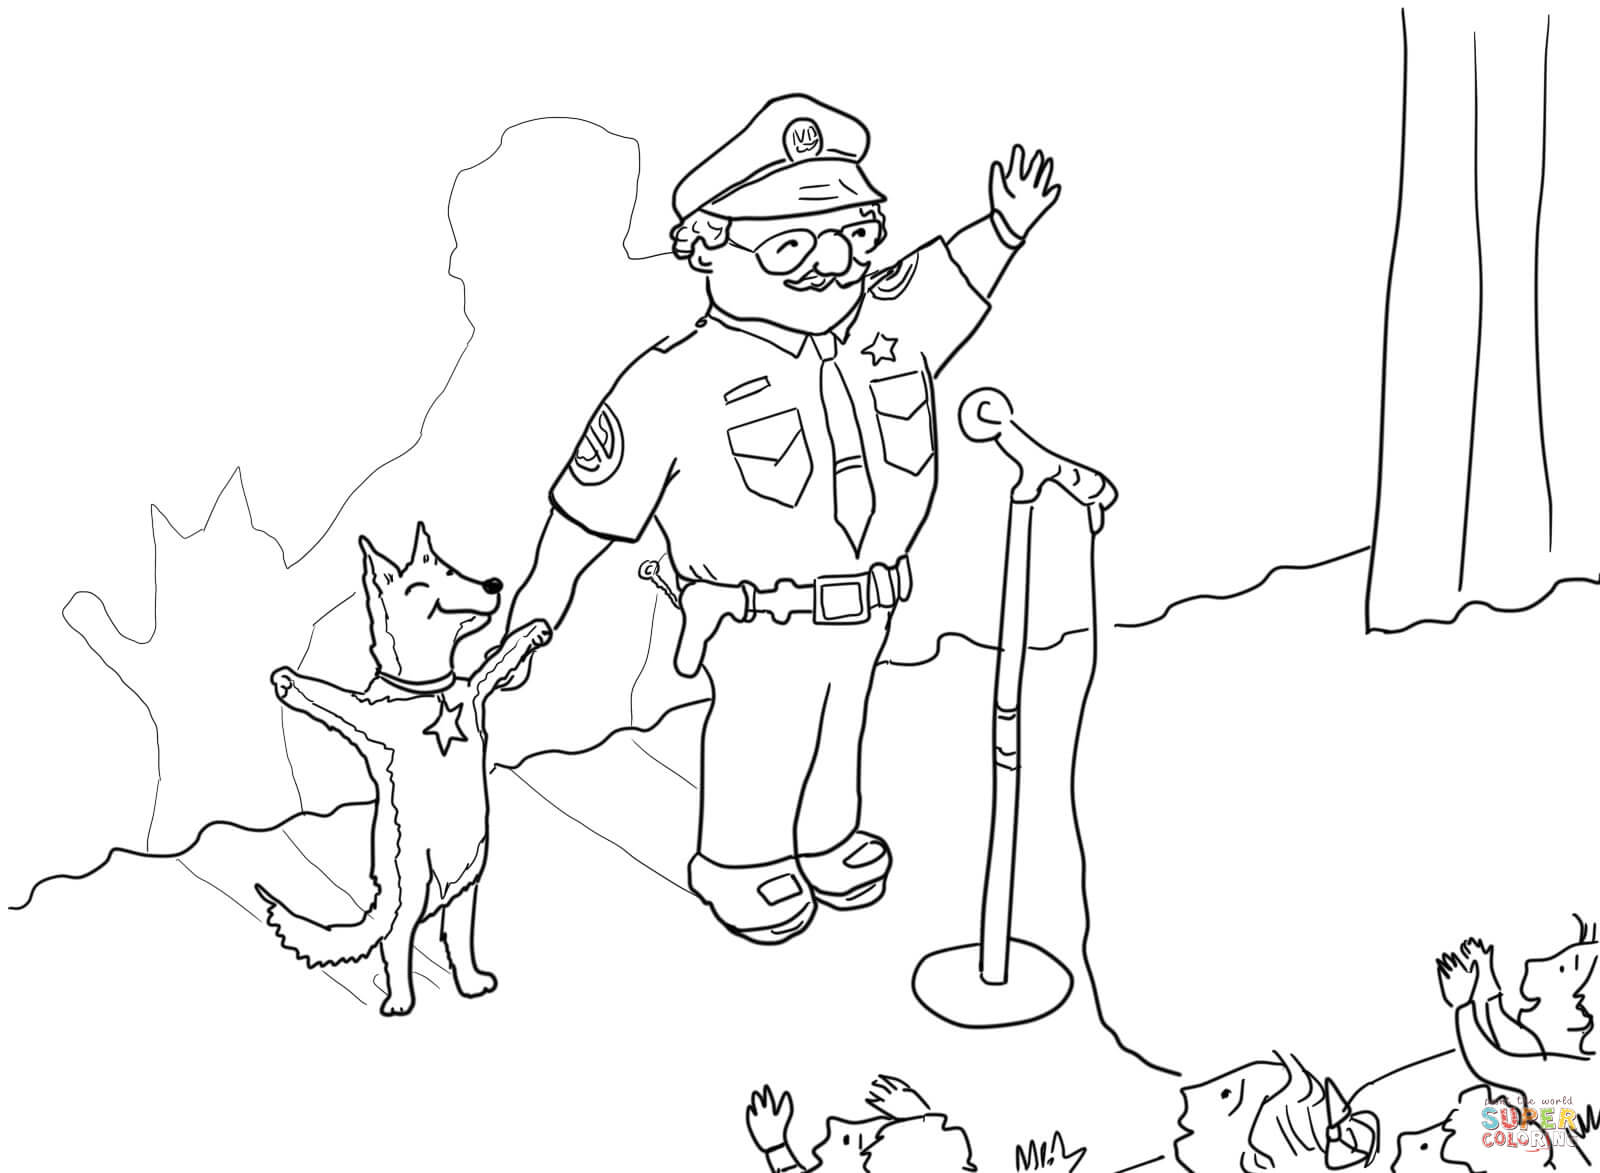 Officer Buckle and gloria taking a bow on stage coloring page